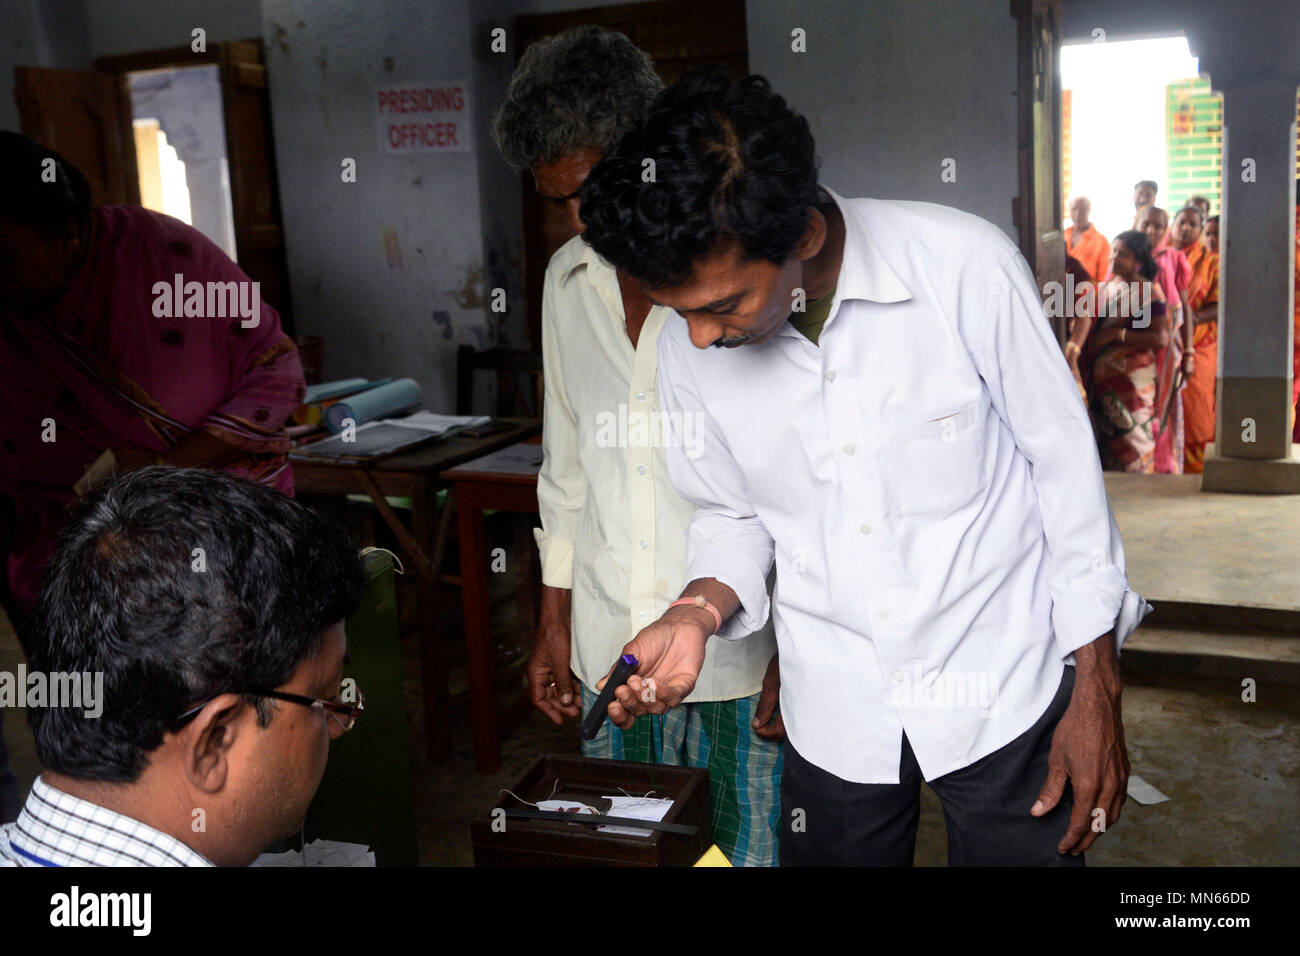 Kolkata, India. 14th May, 2018. Indian man looks the stamp before casting his vote at polling station at Singur area of Hooghly district during the West Bengal Three Tier Panchayat Election 2018. Single phase Three Tier Panchayat Election 2018 held at the district of West Bengal, over all 72.5% polls recorded till the end. Credit: Saikat Paul/Pacific Press/Alamy Live News Stock Photo